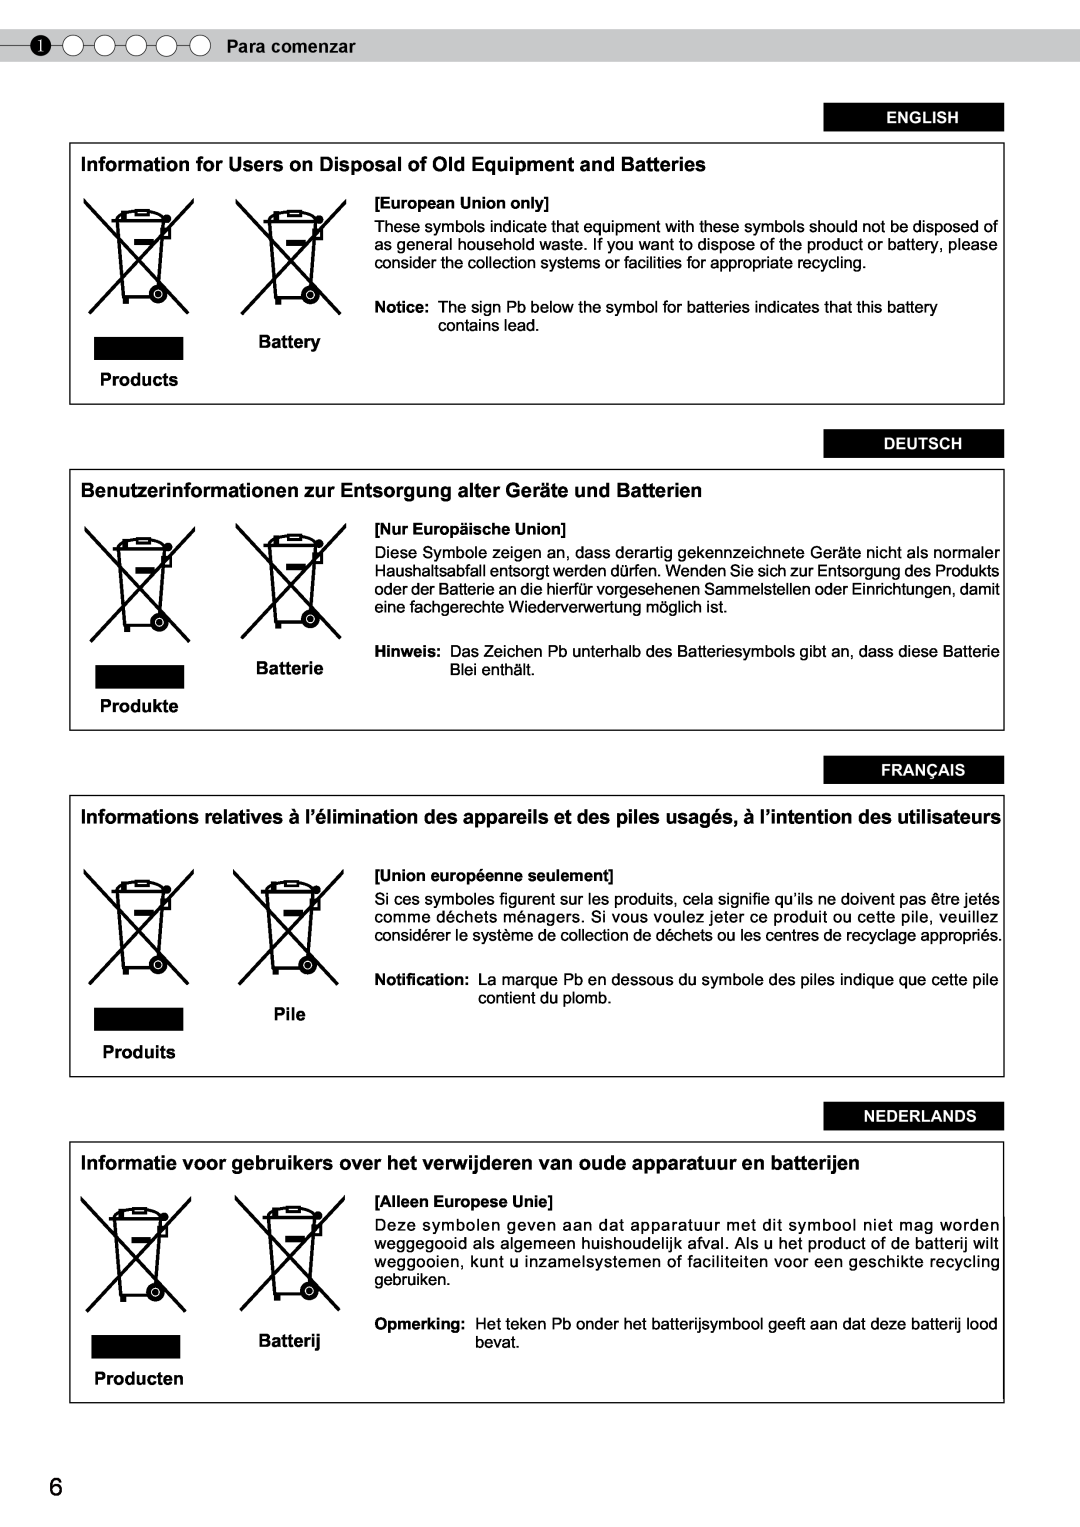 JVC DLA-RS10 manual Information for Users on Disposal of Old Equipment and Batteries, Battery Products, Batterie Produkte 